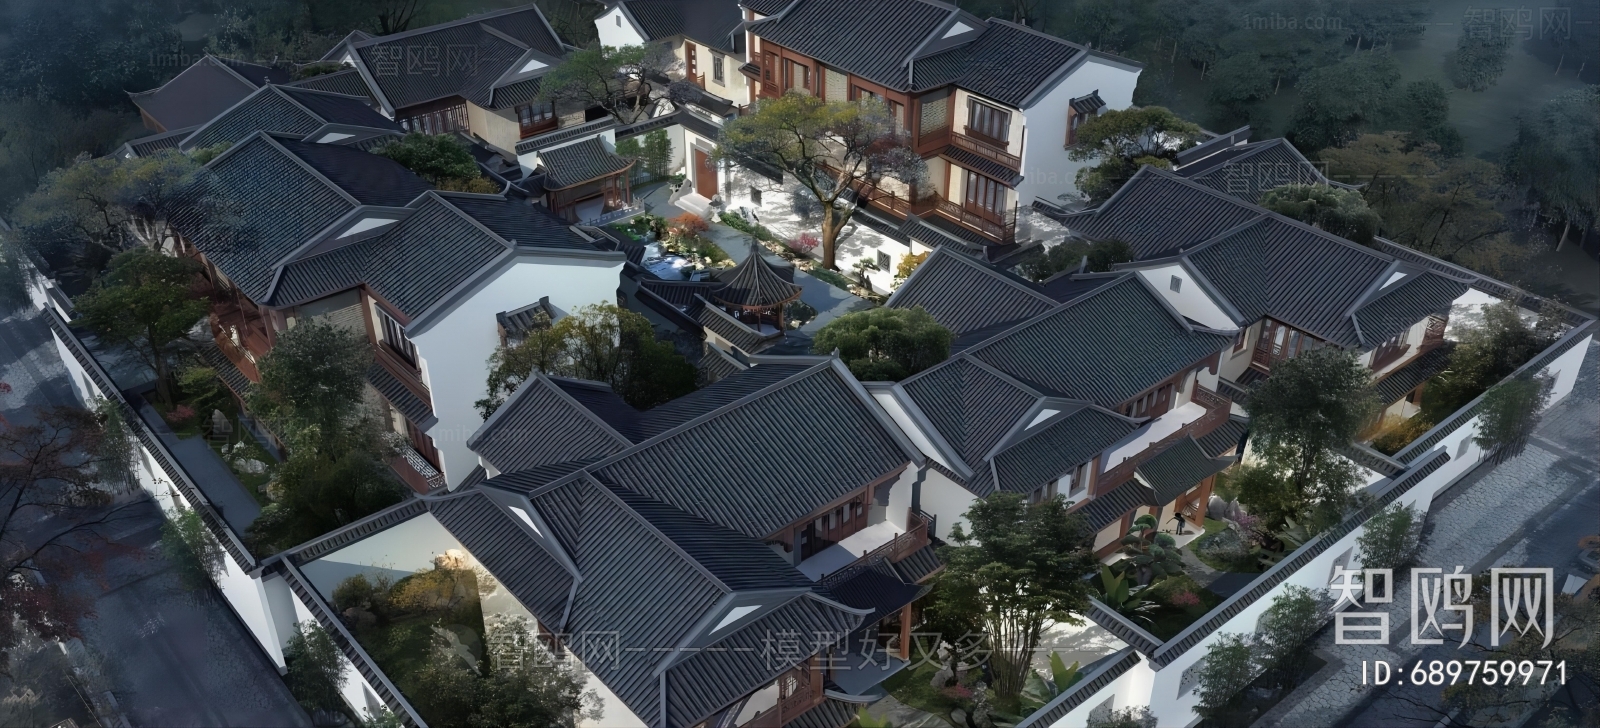 New Chinese Style Architectural Bird's-eye View Planning